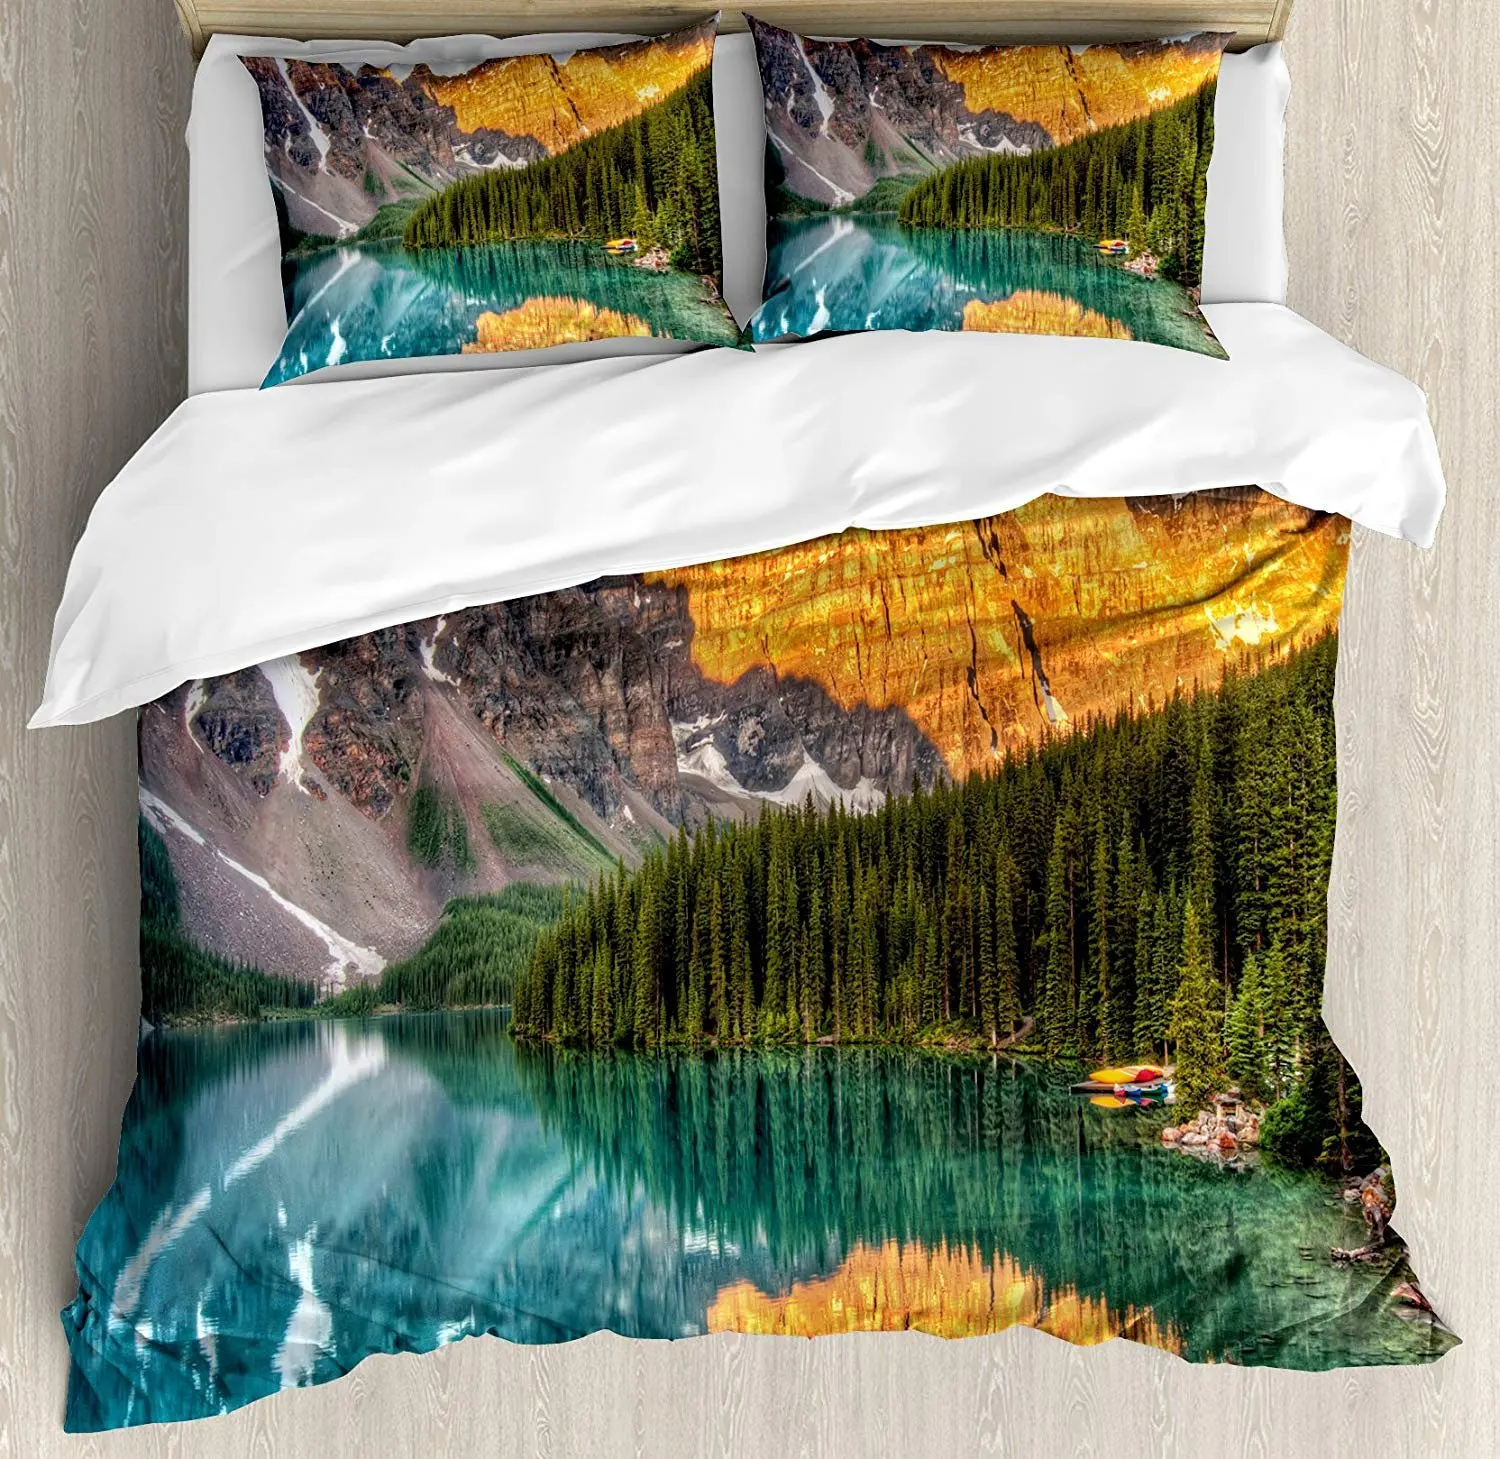 

Nature Bedding Set Moraine Lake Canadian Mountain Range with Creek Pine Forest Mother Earth Scenery Duvet Cover Bed Set